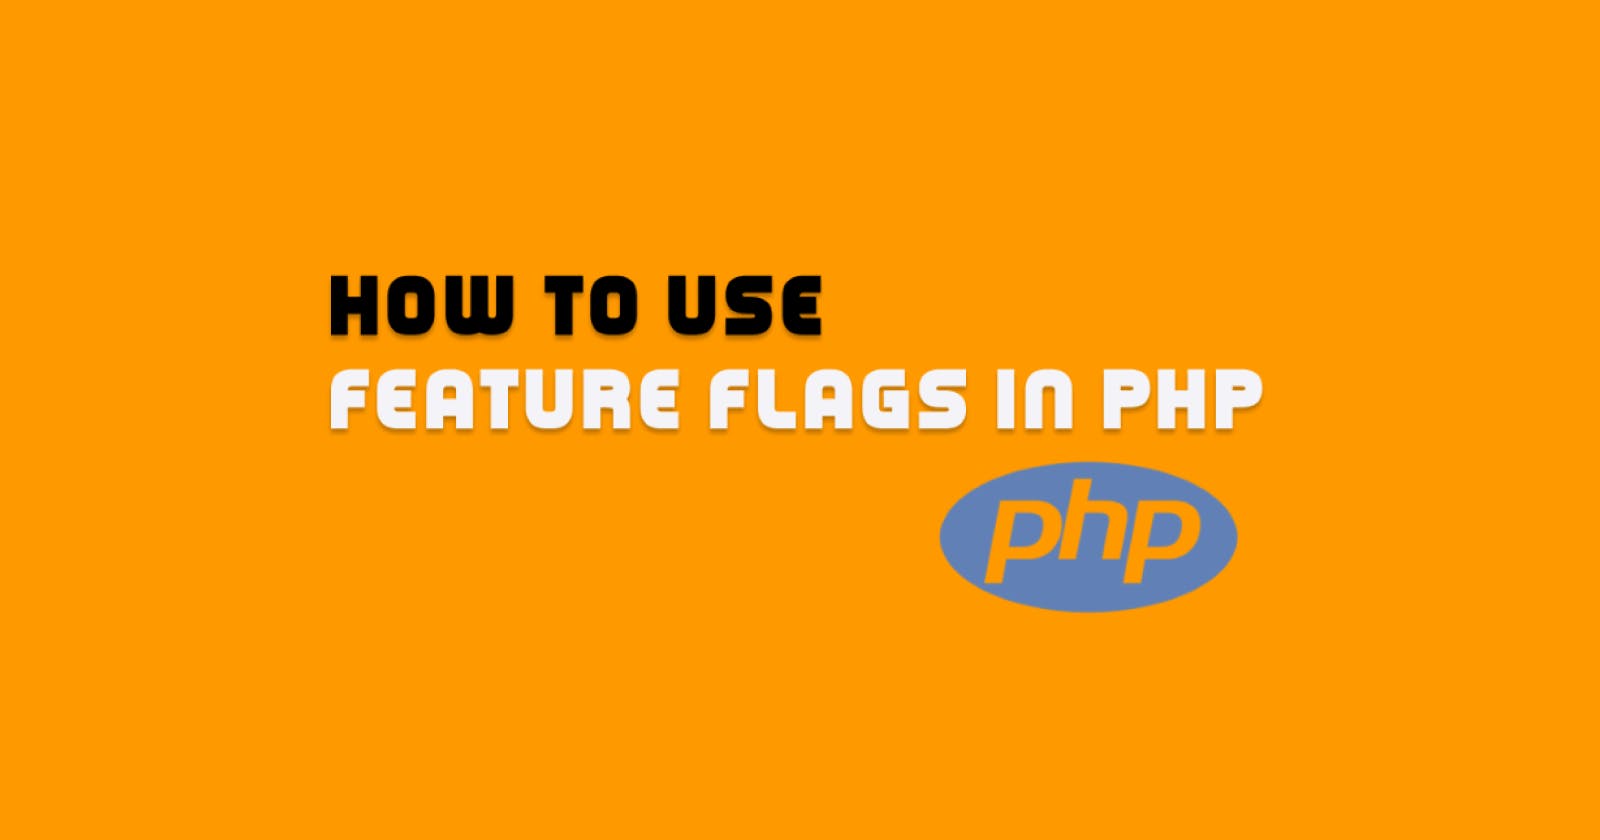 How to A/B test new features in PHP using Feature Flags and Amplitude